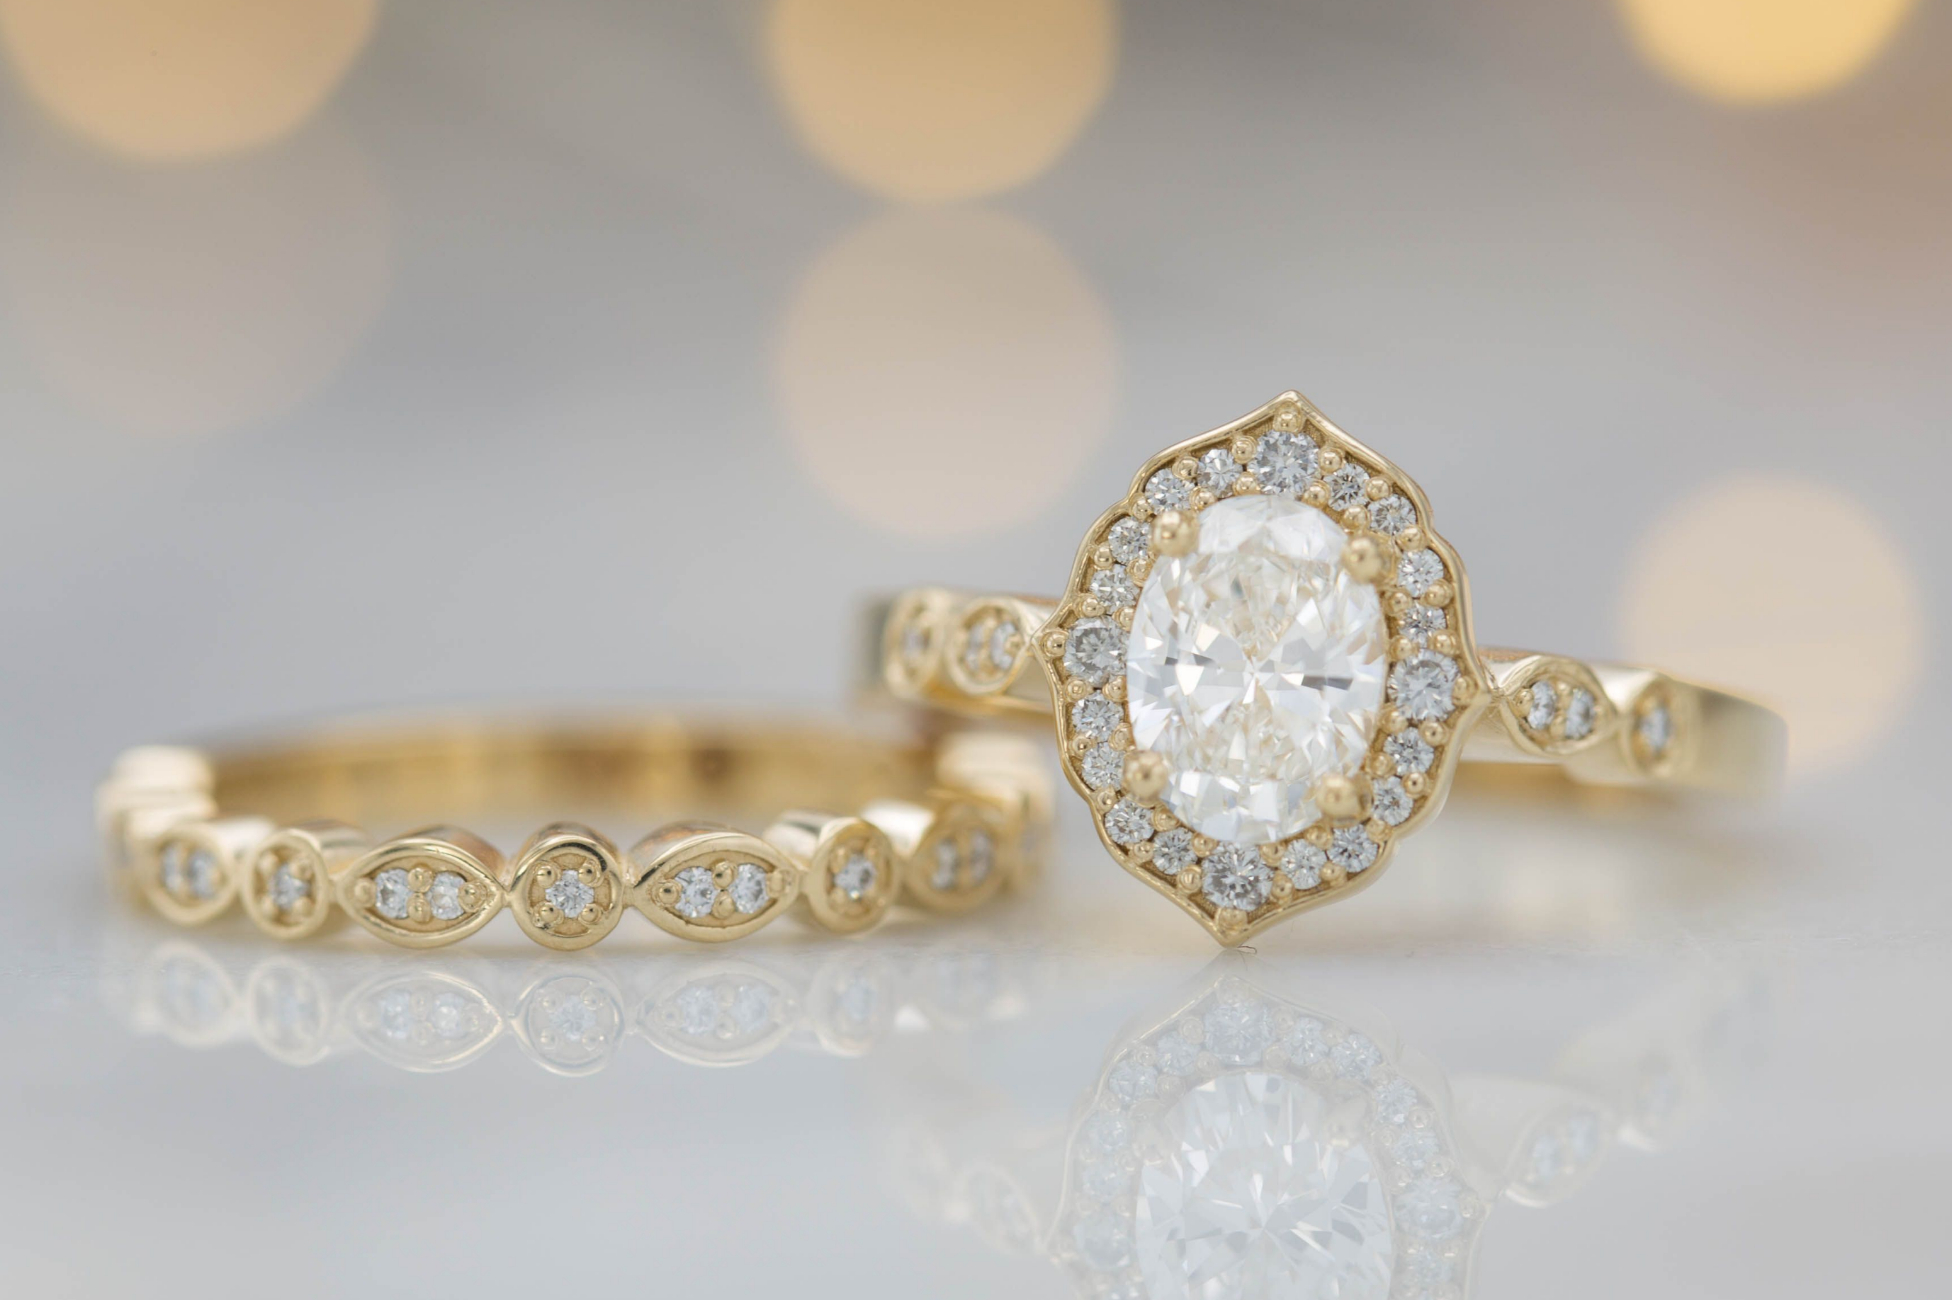 Vintage-inspired floral bridal set in yellow gold and diamond